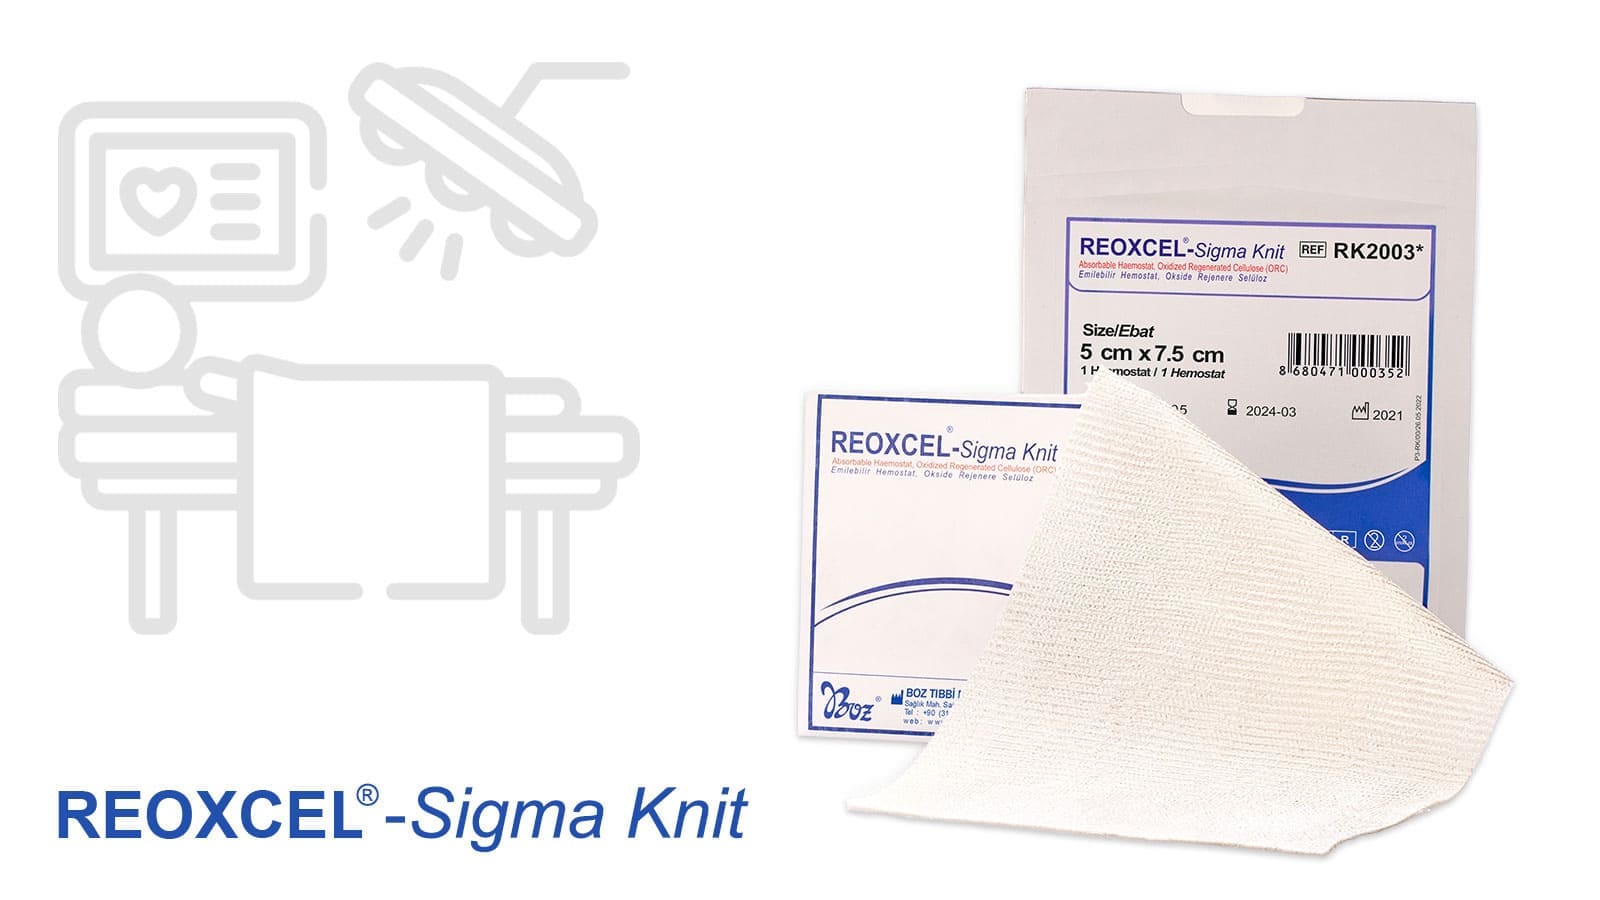 Reoxcel Sigma Knit absorbable and sterile haemostat with plain texture and thick knitting can be laid, pressed or sutured on bleeding surfaces.